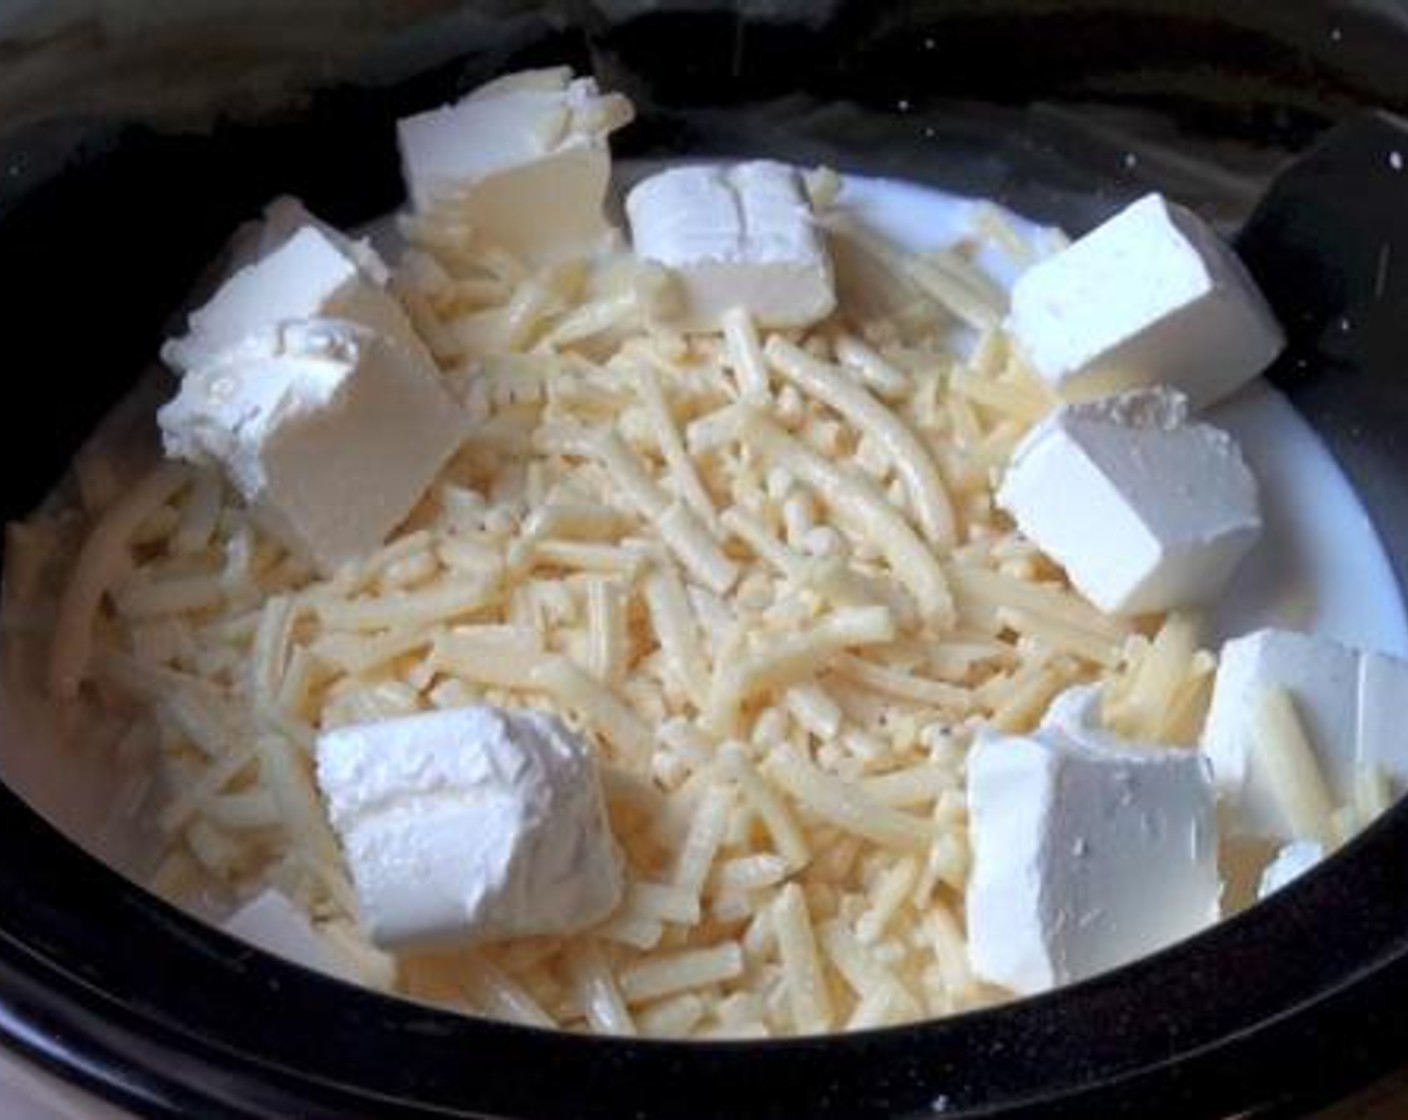 step 1 Into a slow cooker, add the Elbow Macaroni (1.1 lb), Cheddar Cheese (3 cups), Cream Cheese (1 cup), Milk (1 cup), and Evaporated Milk (1 1/2 cups). Season with Salt (to taste) and Ground Black Pepper (to taste) and allow it to simmer for 2 and half hours on the low setting.